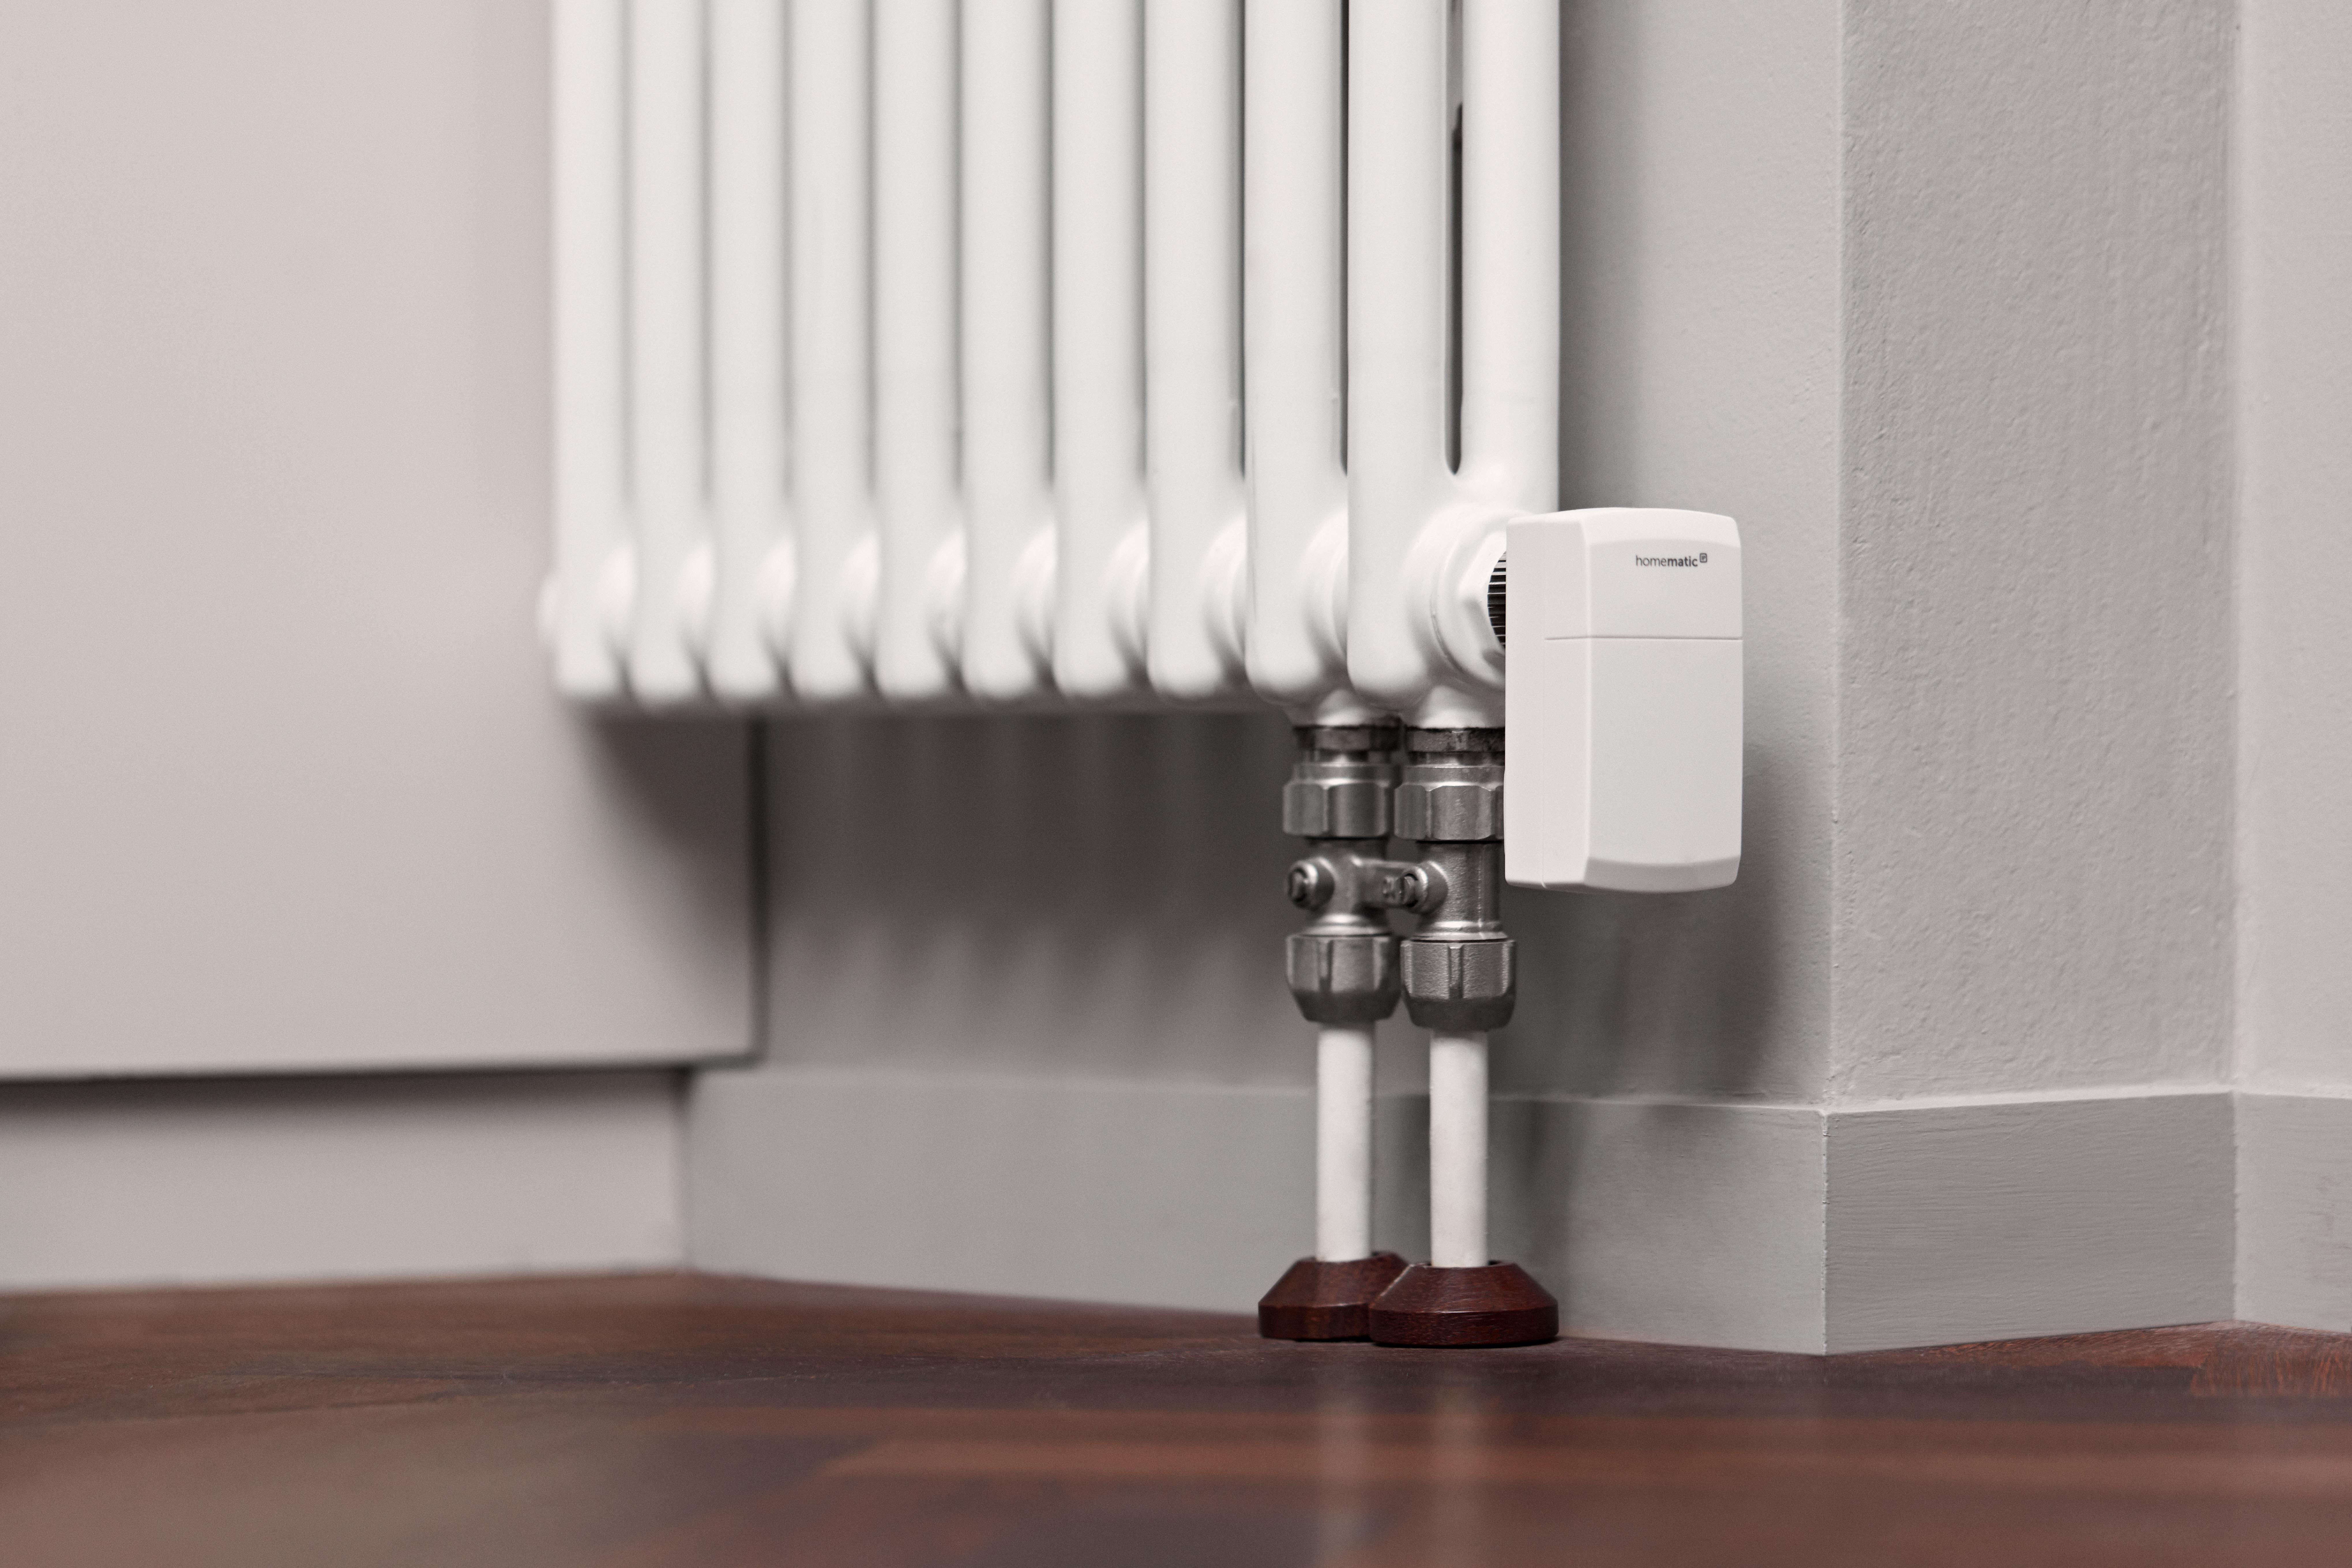 Radiator thermostat – compact 2 | Homematic IP